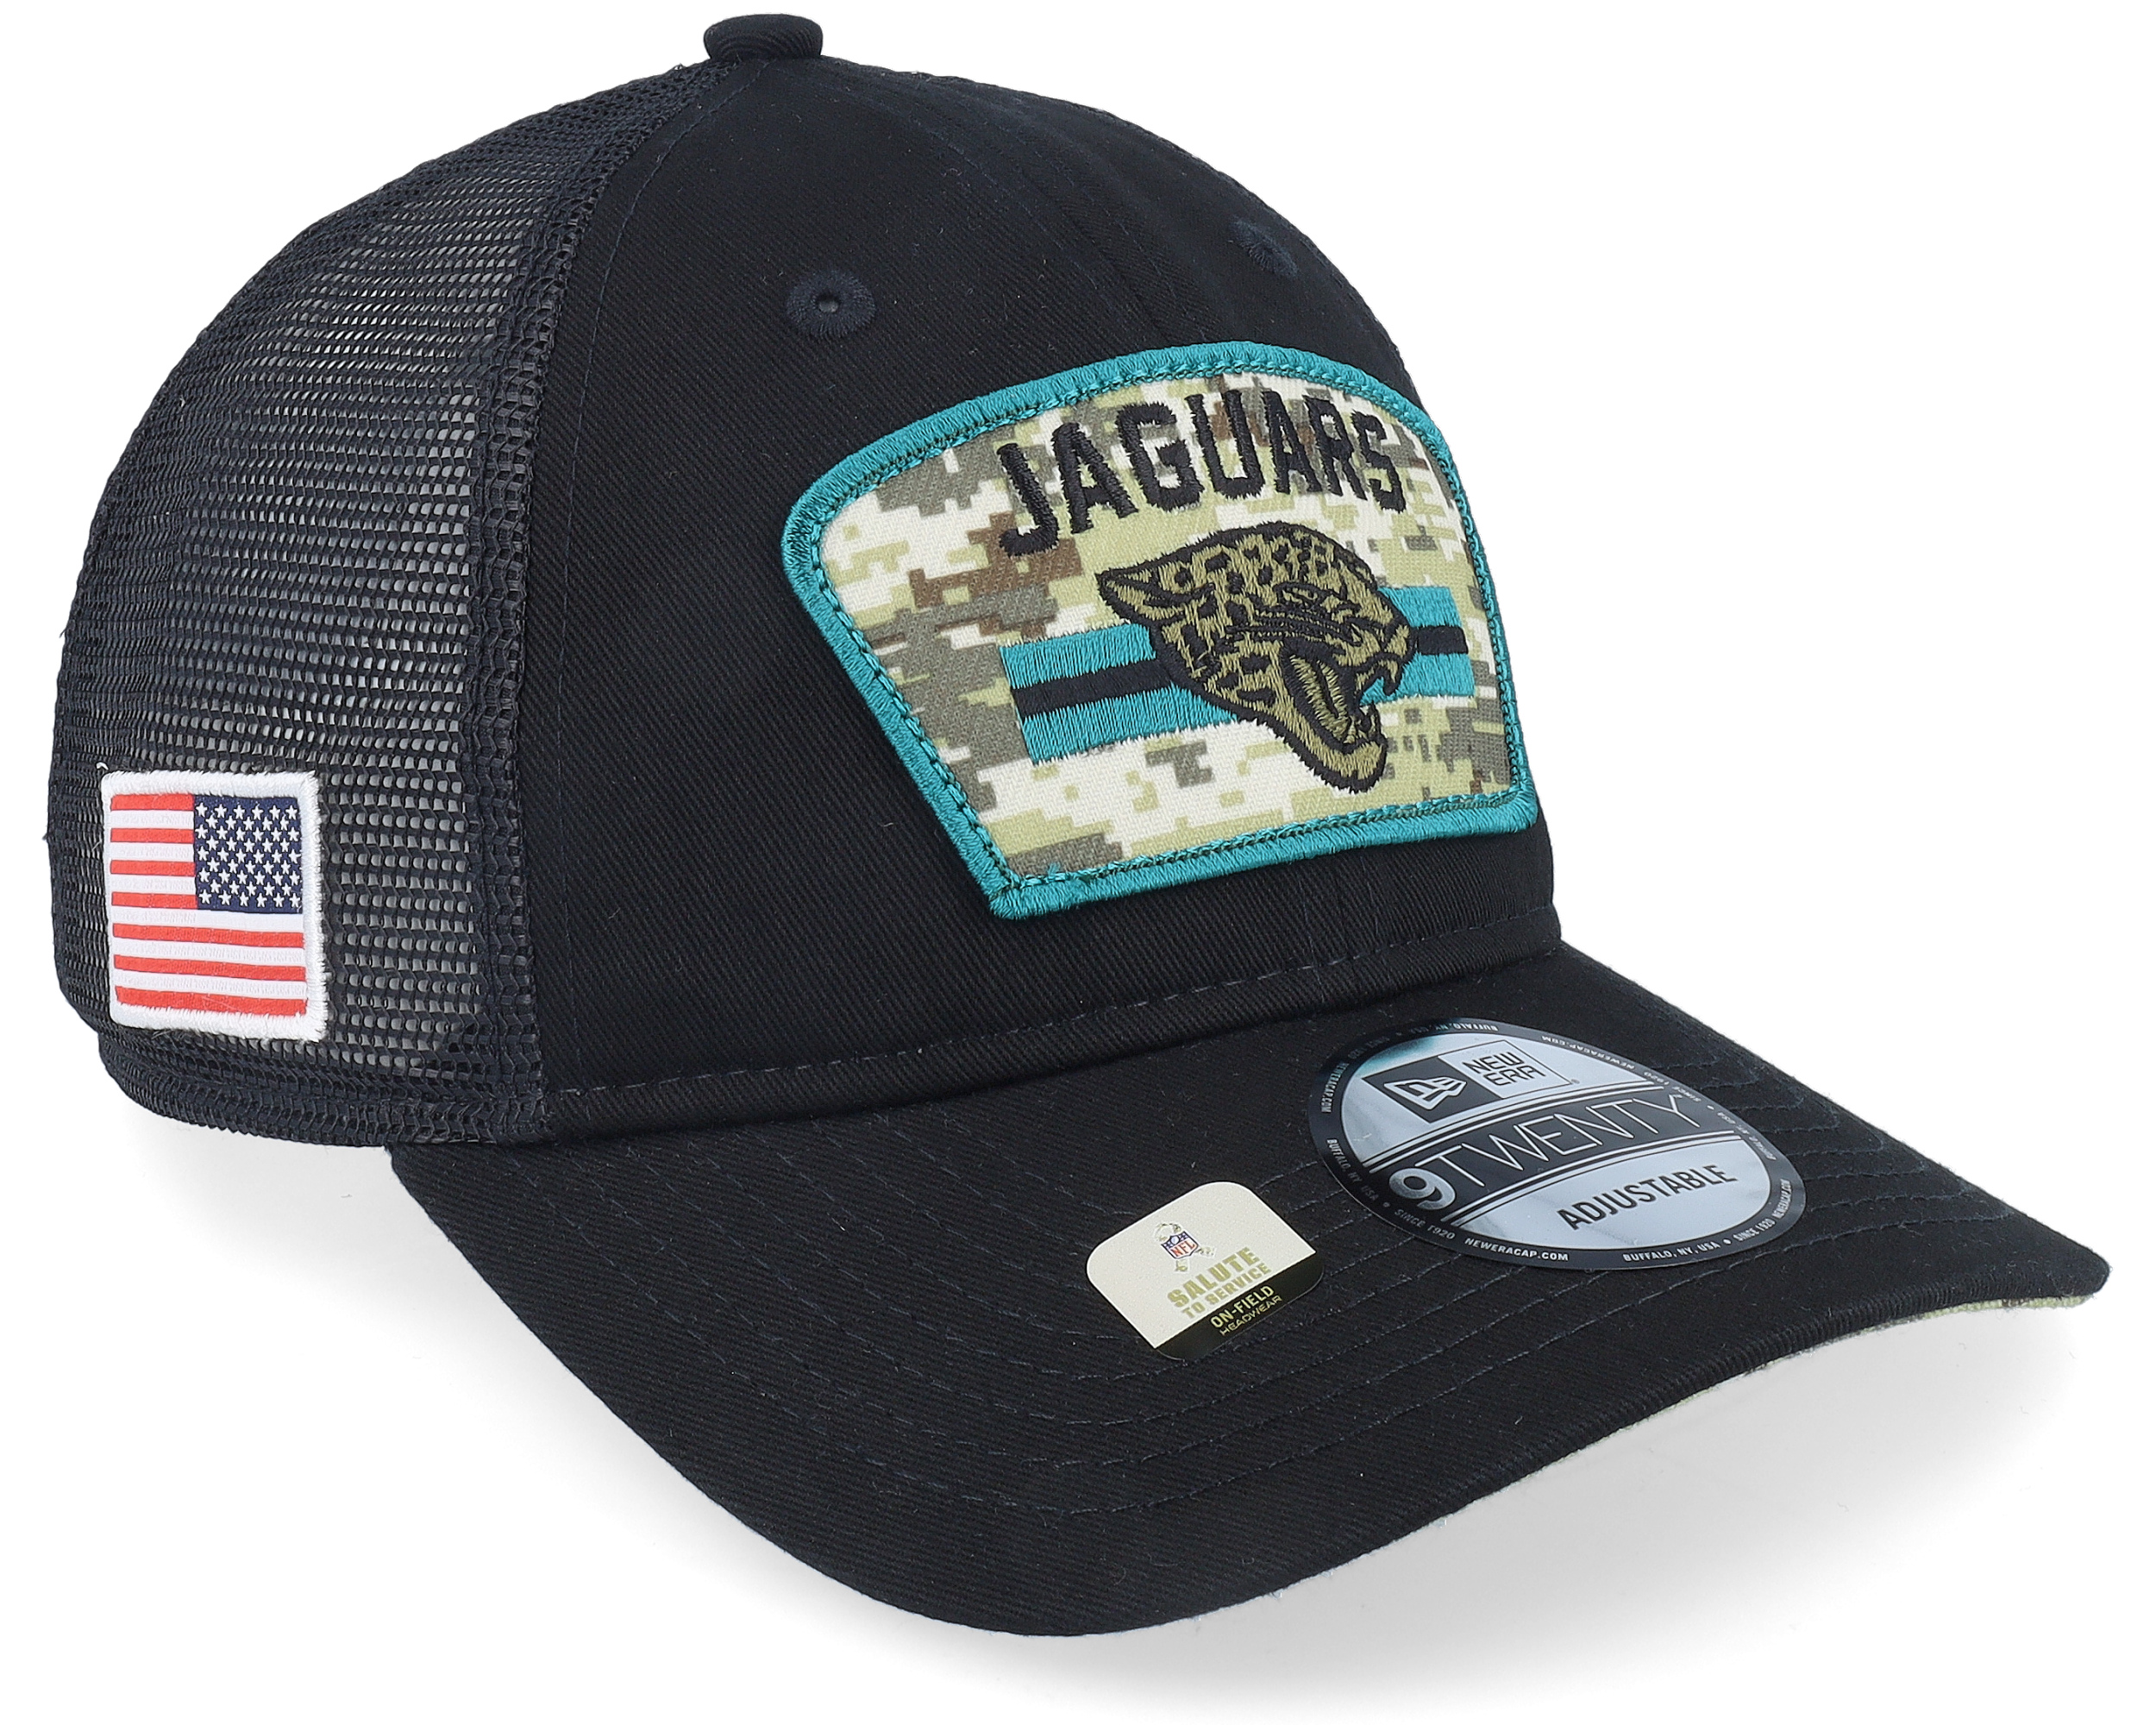 Jacksonville Jaguars Salute to Service Cuffed Knit Hat